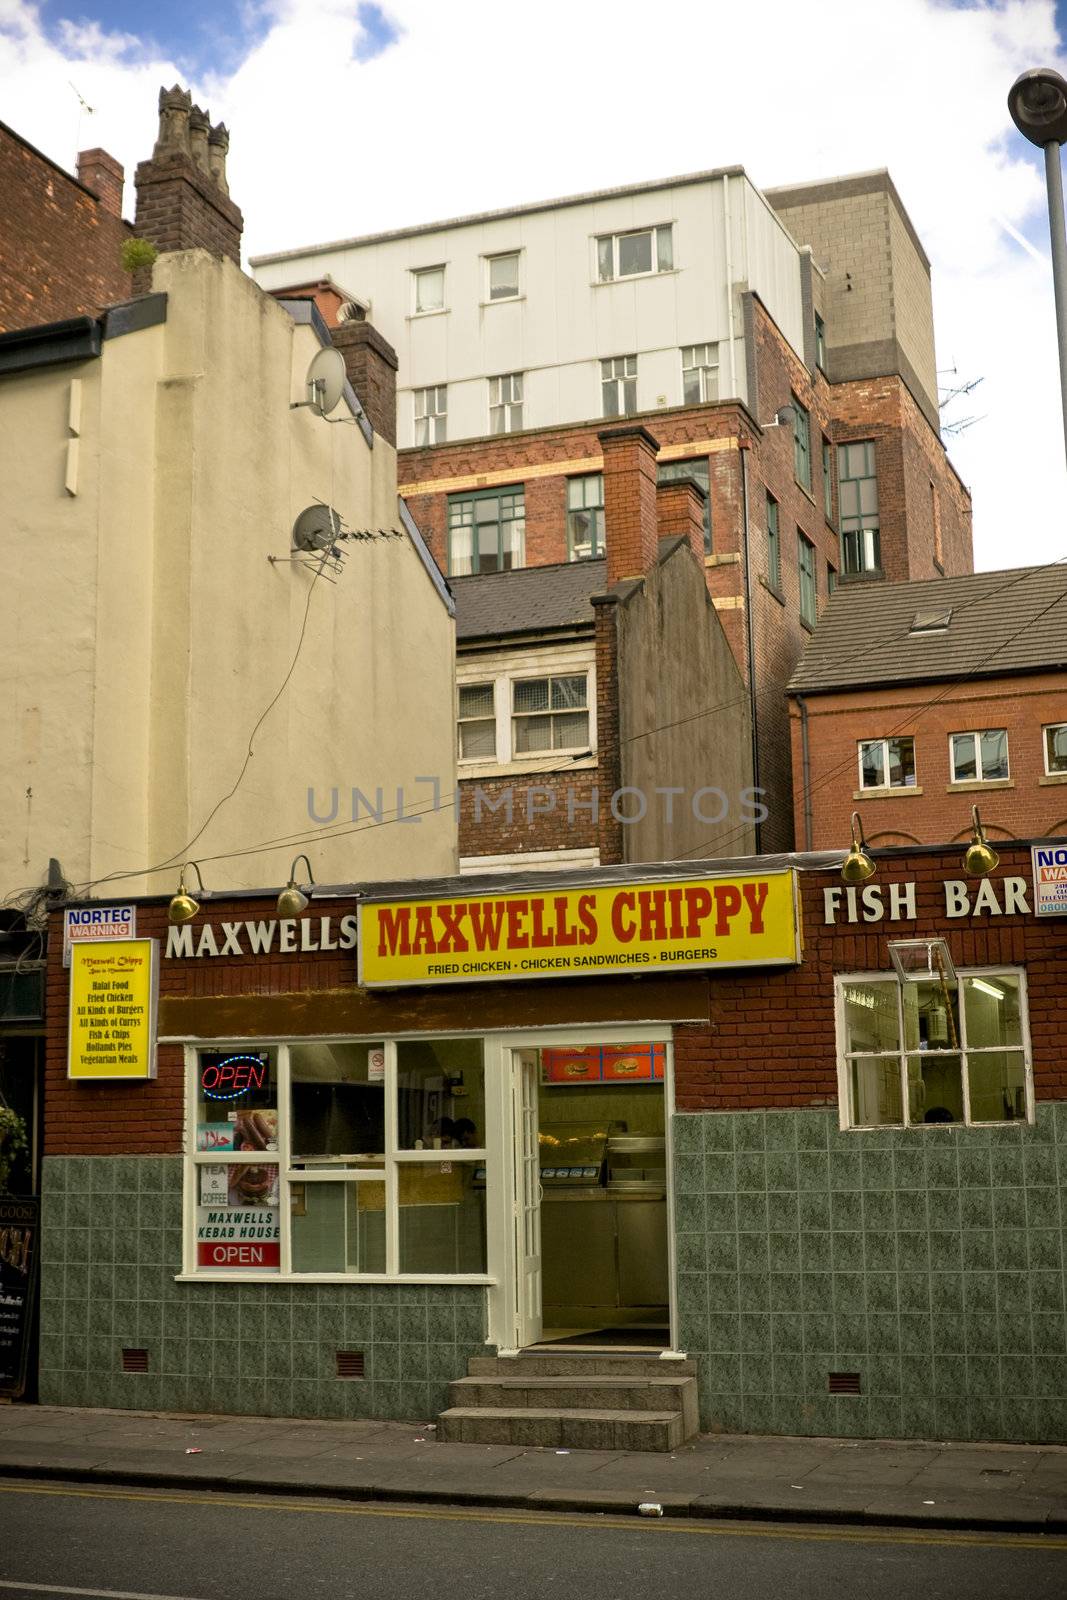 View of Maxwells Chippy in Bloom Street in manchester on a background of other buildings